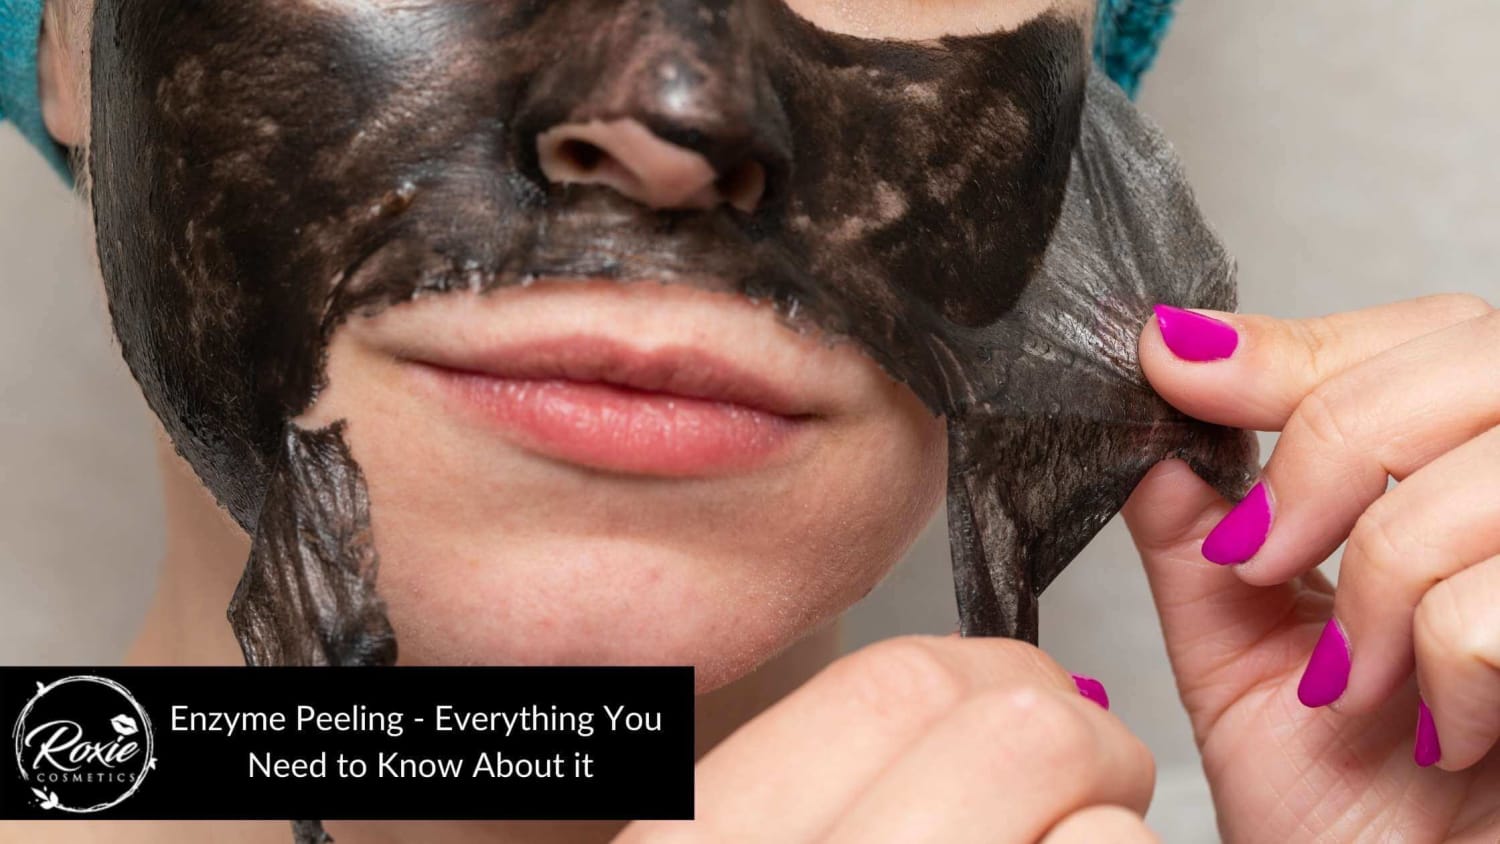 Enzyme Peeling - Everything You Need to Know About it